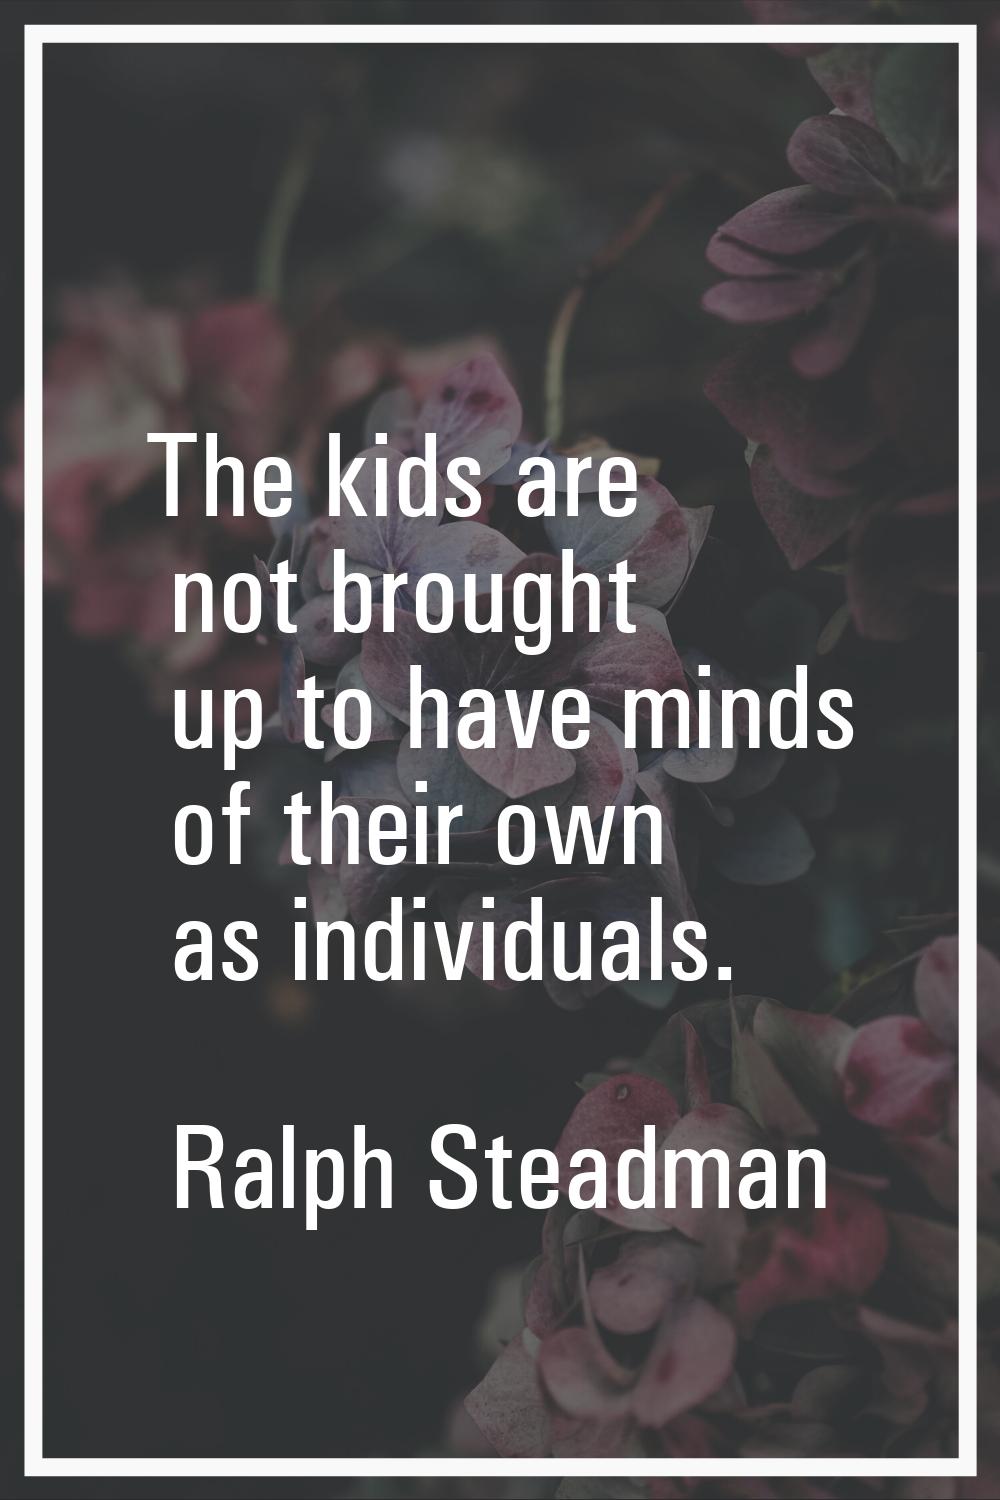 The kids are not brought up to have minds of their own as individuals.